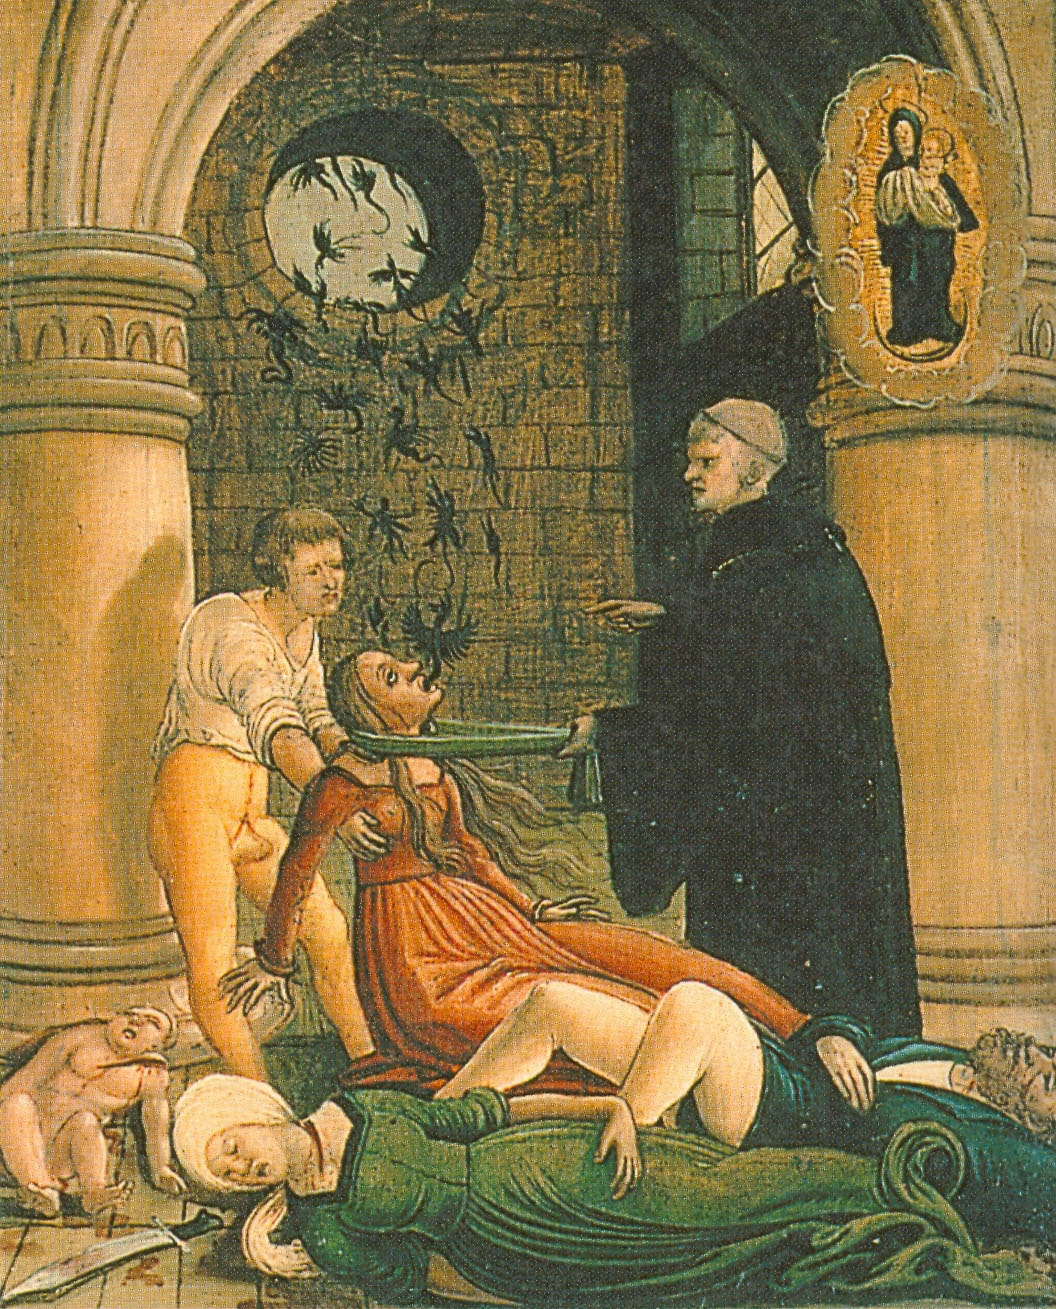 A woman has a priest's mantle around her neck and is held in place by the priest and another man whilst black winged creatures symbolising demons escape from her mouth and out of the window. Dead bodies of a baby, man, and woman are depicted below on the floor with blood and a knife.